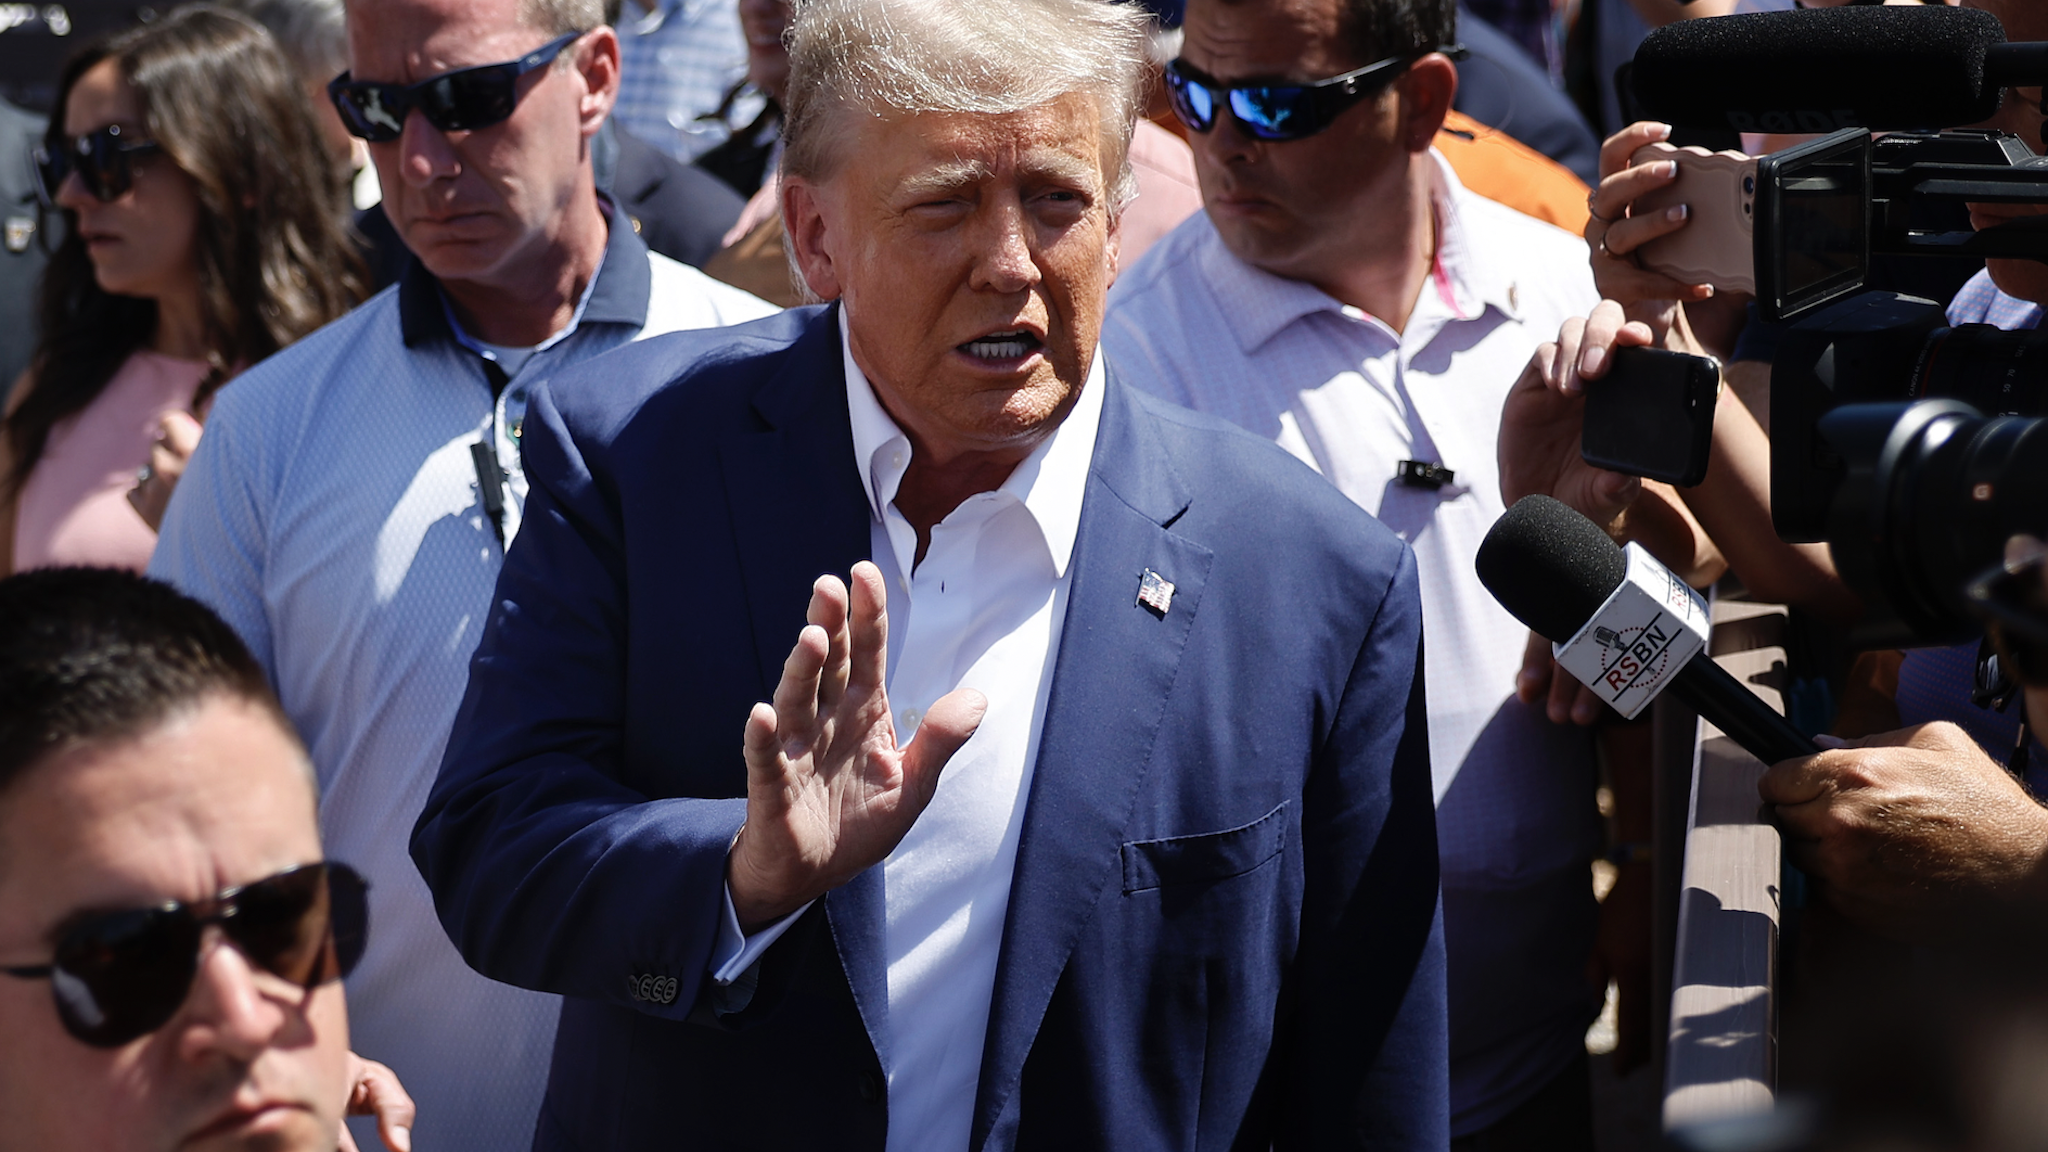 DES MOINES, IOWA - AUGUST 12: Surrounded by campaign staff and members of the U.S. Secret Service, Former U.S. President Donald Trump (C) waves to supporters as he visits the Iowa Pork Producers Tent at the Iowa State Fair on August 12, 2023 in Des Moines, Iowa. Republican and Democratic presidential hopefuls are visiting the fair, a tradition in one of the first states that will test candidates with the 2024 caucuses.